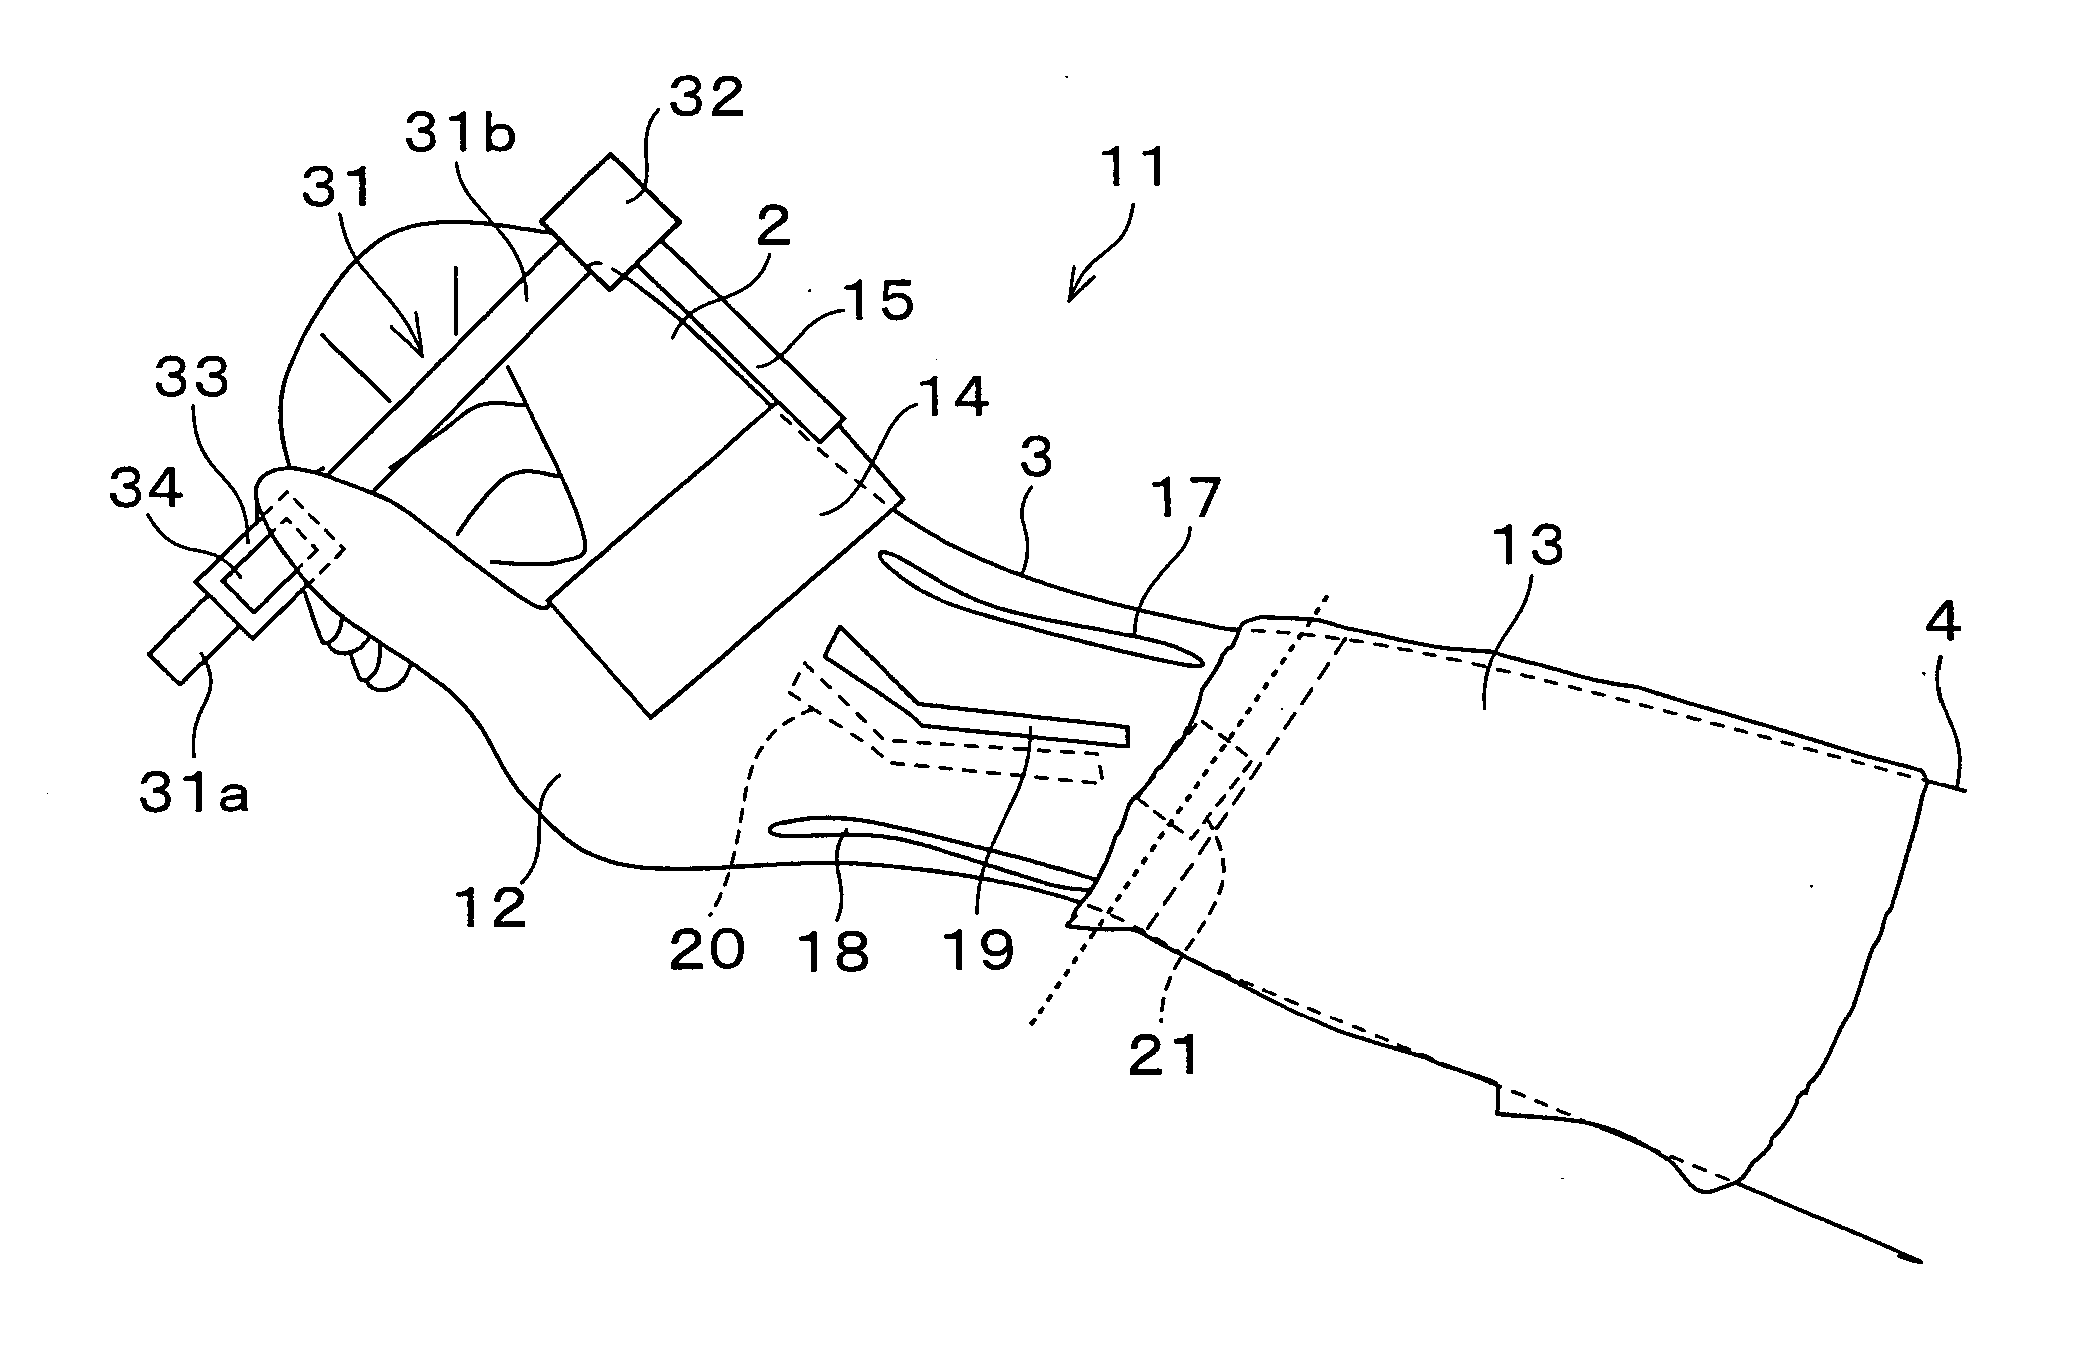 Surgical operation device